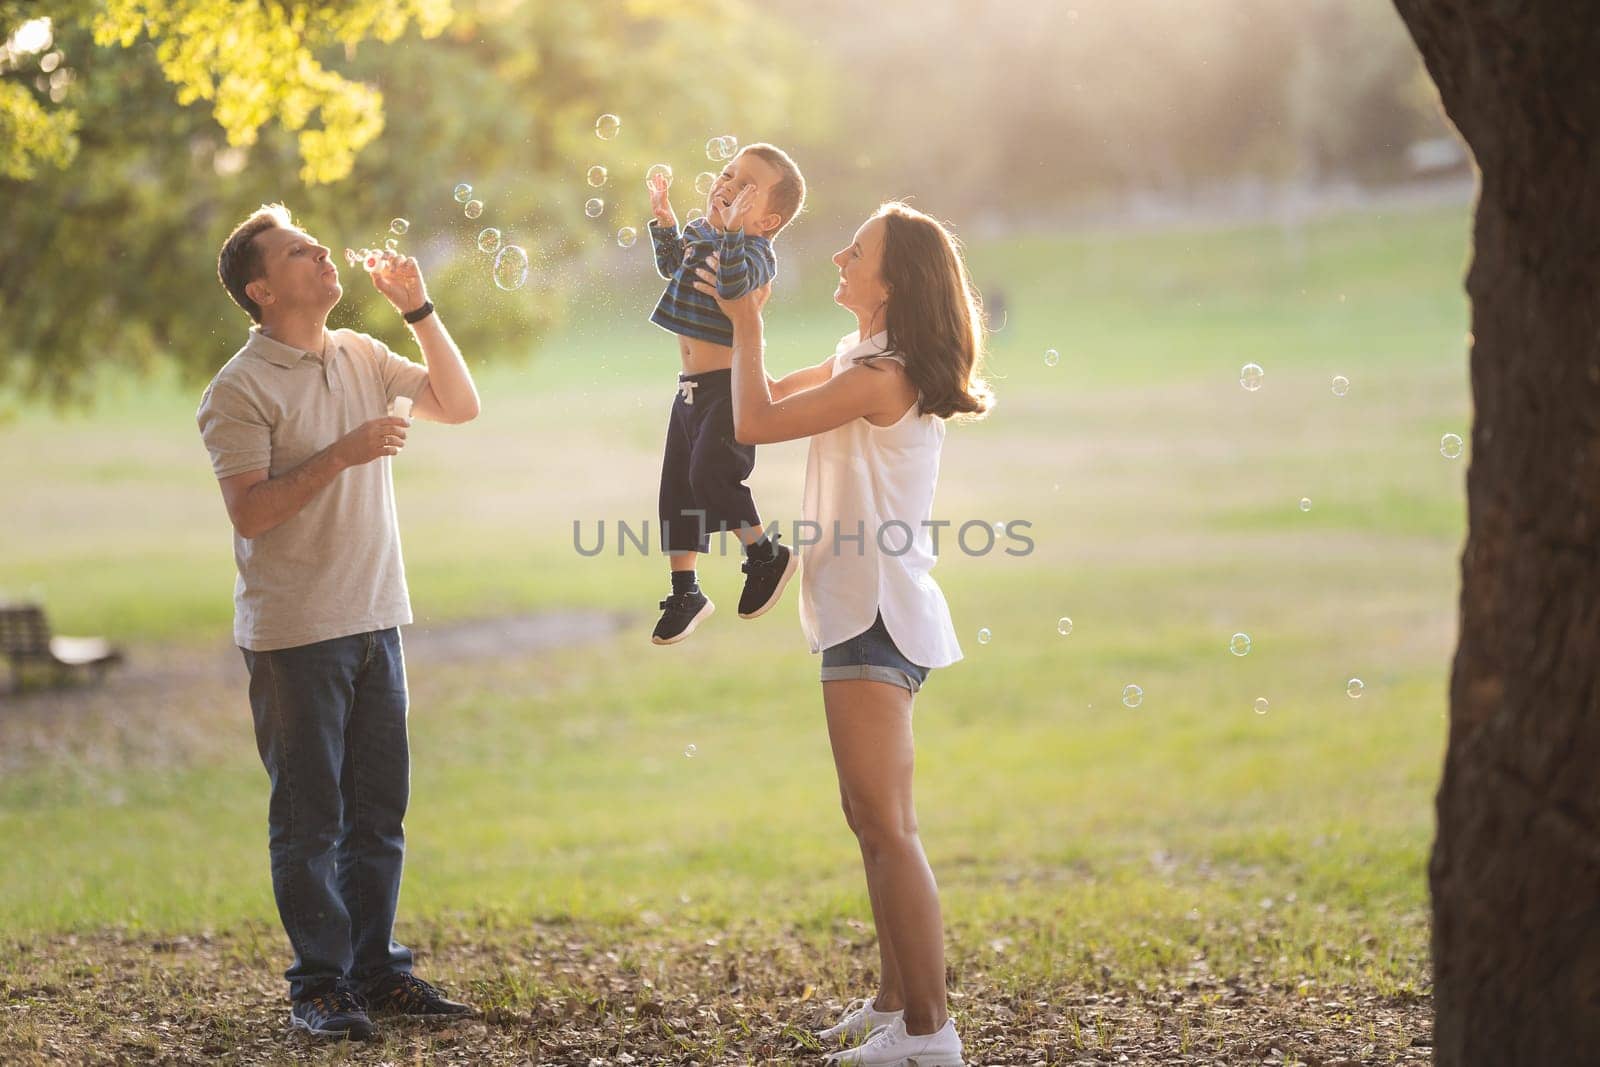 Happy white family spending time in the park - little boy held by his mother catching the soap bubbles his father blowing. Mid shot